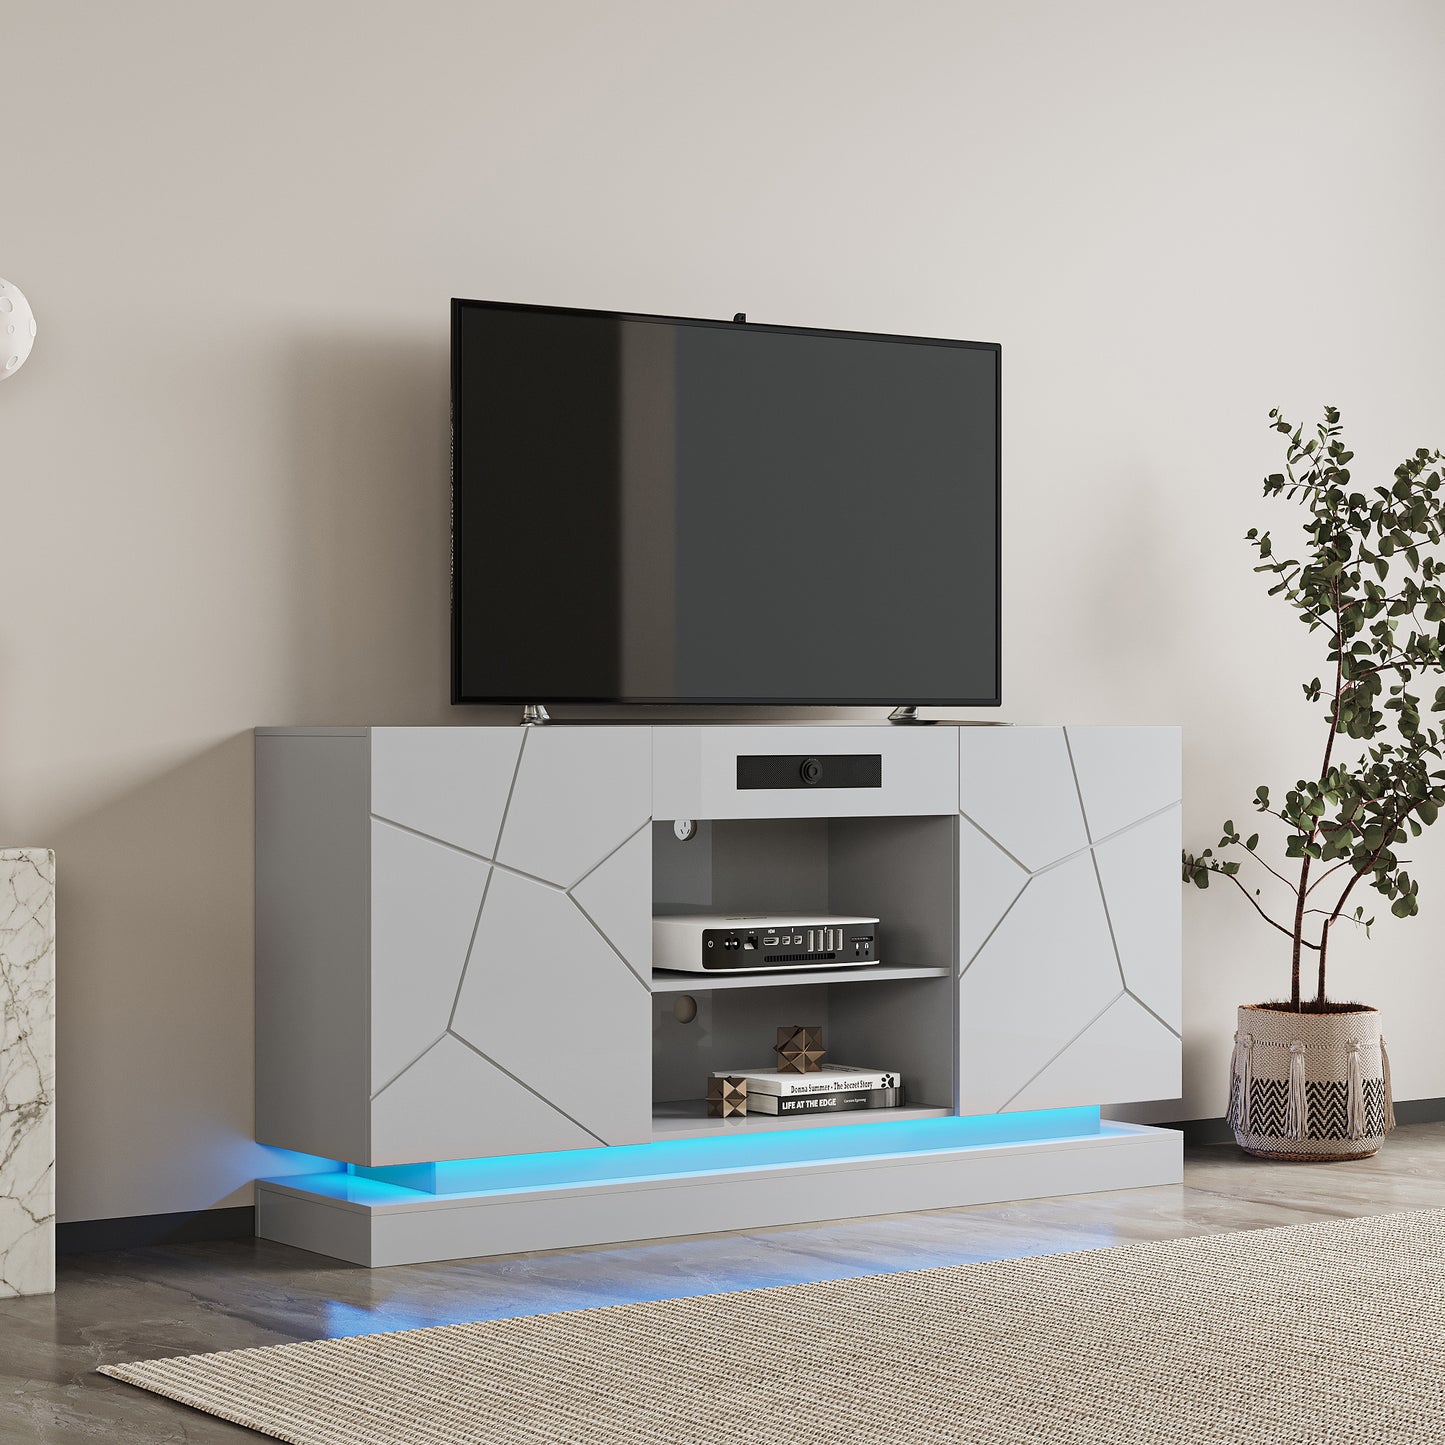 TV Cabinet ;  TV Stand with bluetooth speaker ;  Modern LED TV Cabinet with Storage Drawers;  Living Room Entertainment Center Media Console Table